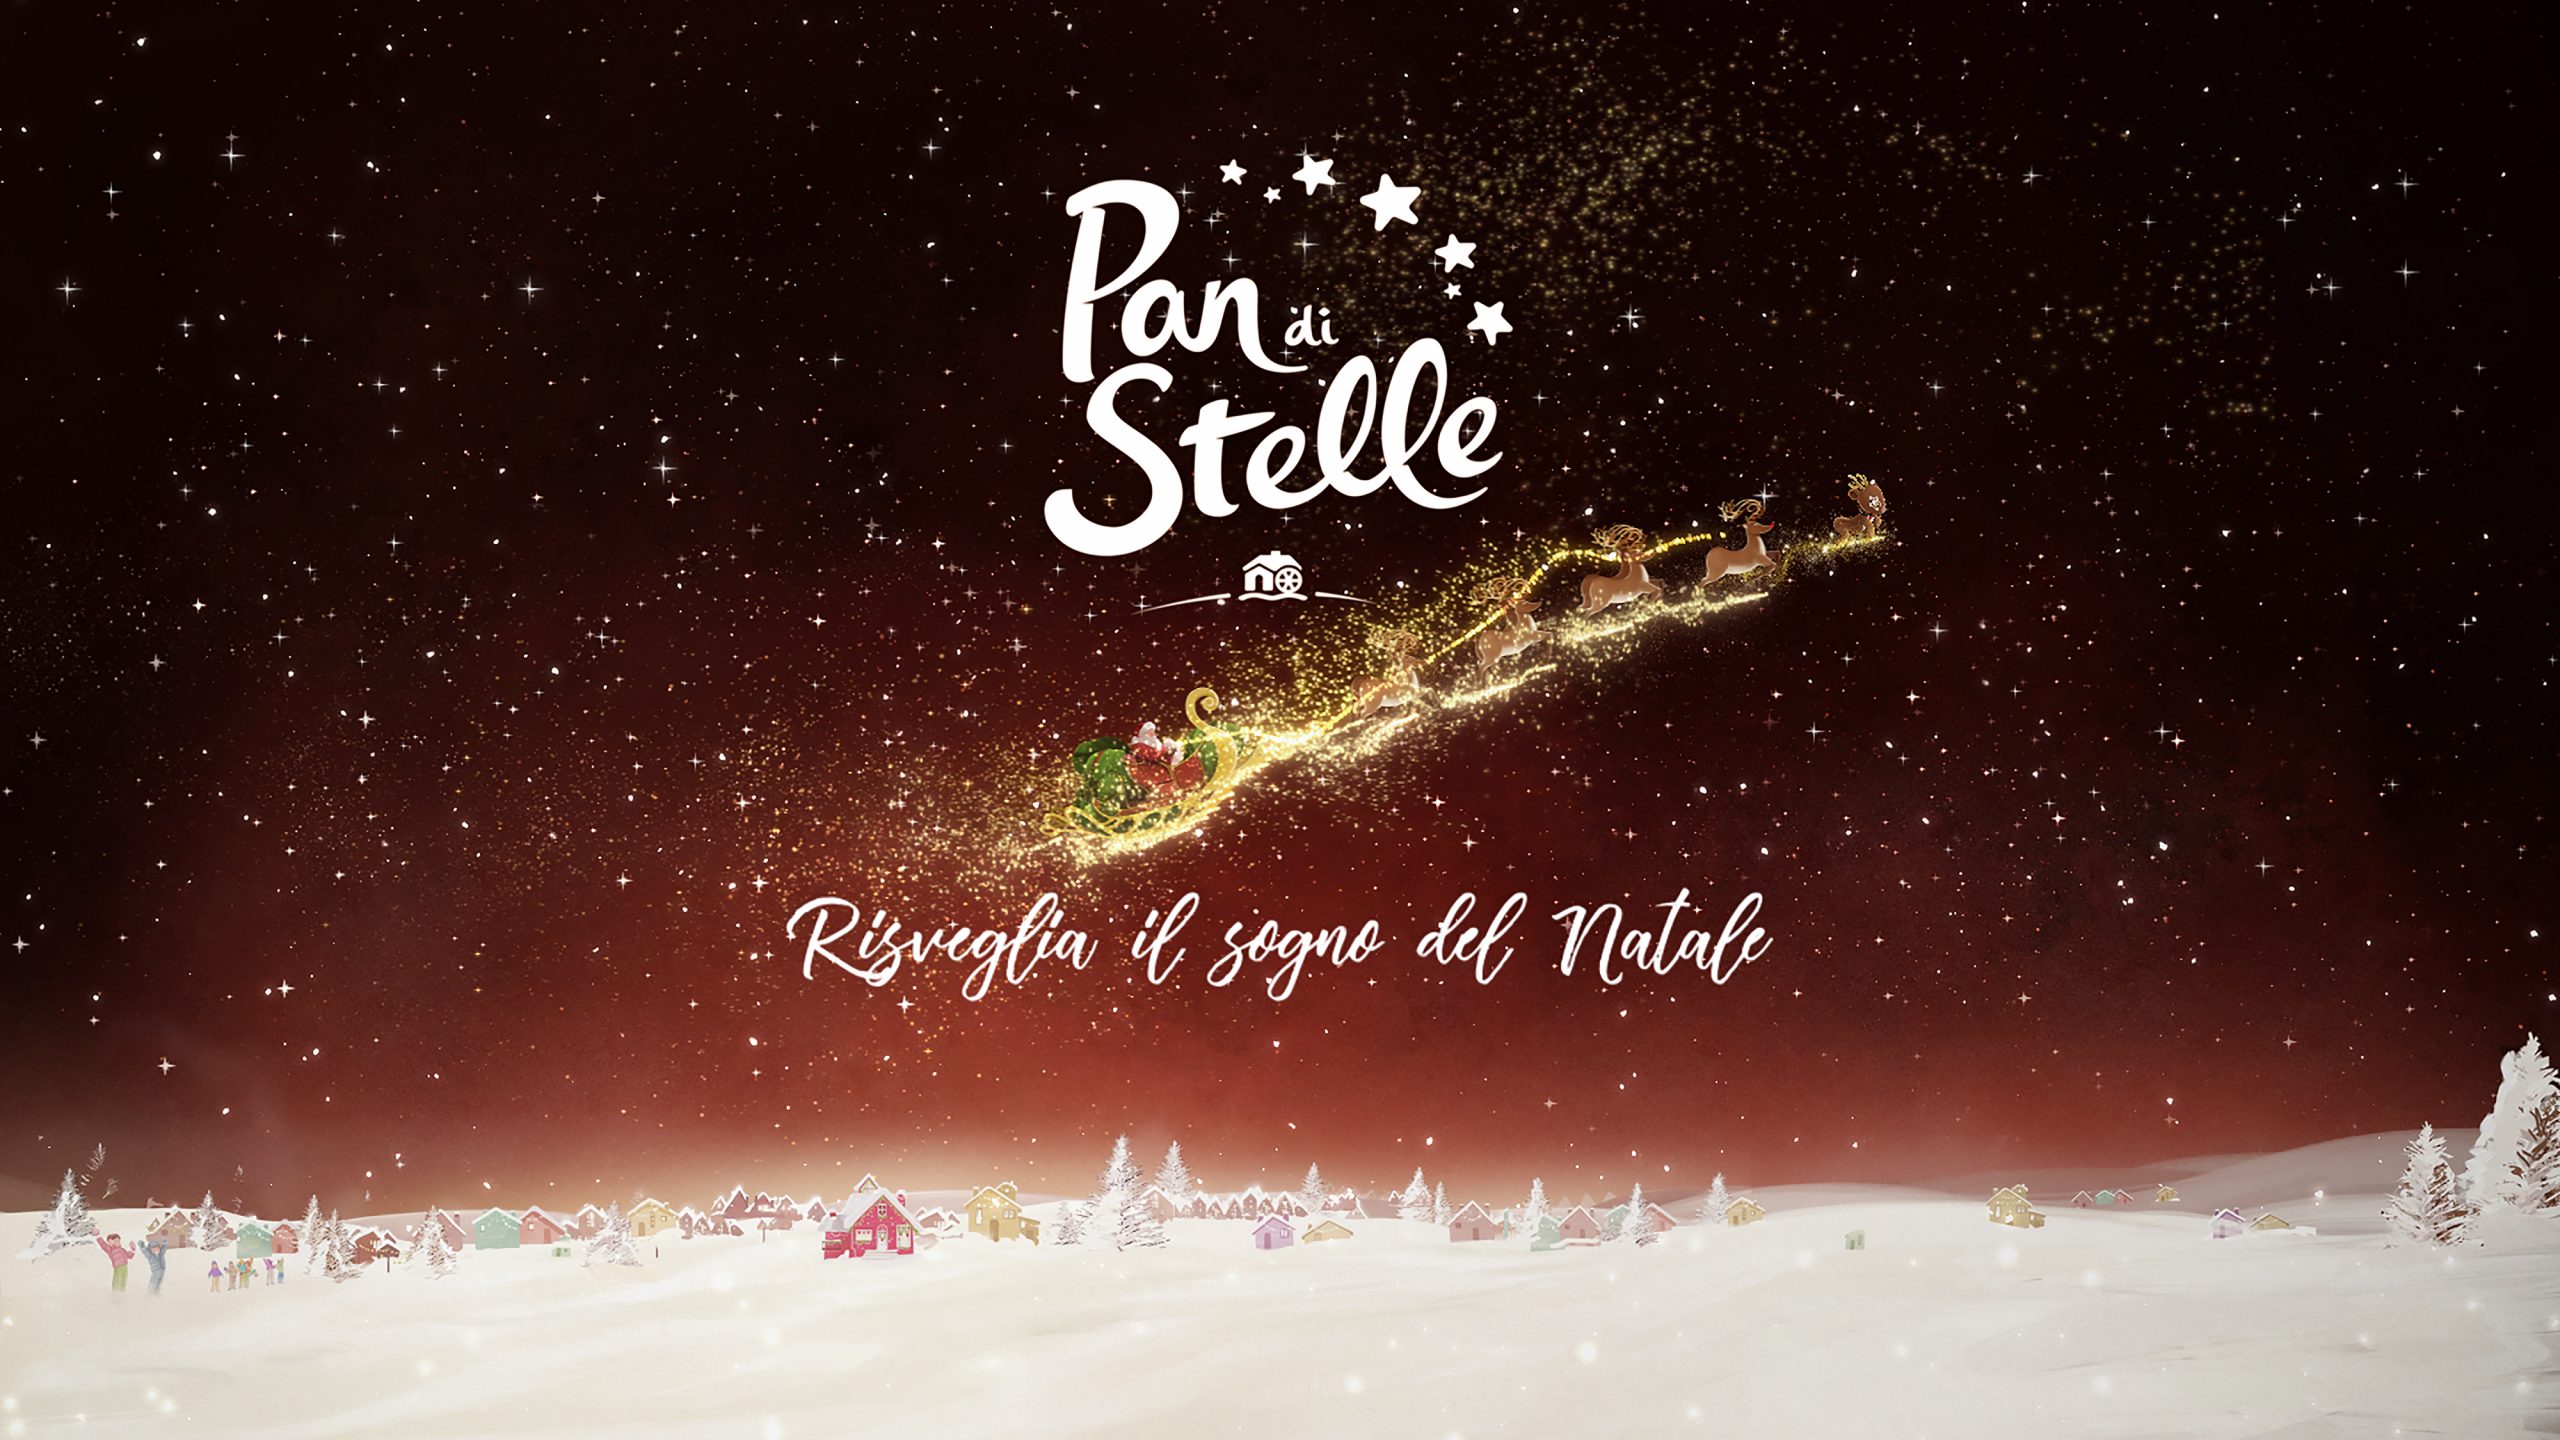 PAN DI STELLE REAWAKENS THE DREAM OF CHRISTMAS. WITH A PROJECT CREATED BY ARMANDO TESTA, AND WITH COMETA, A SUPER SWEET STAR